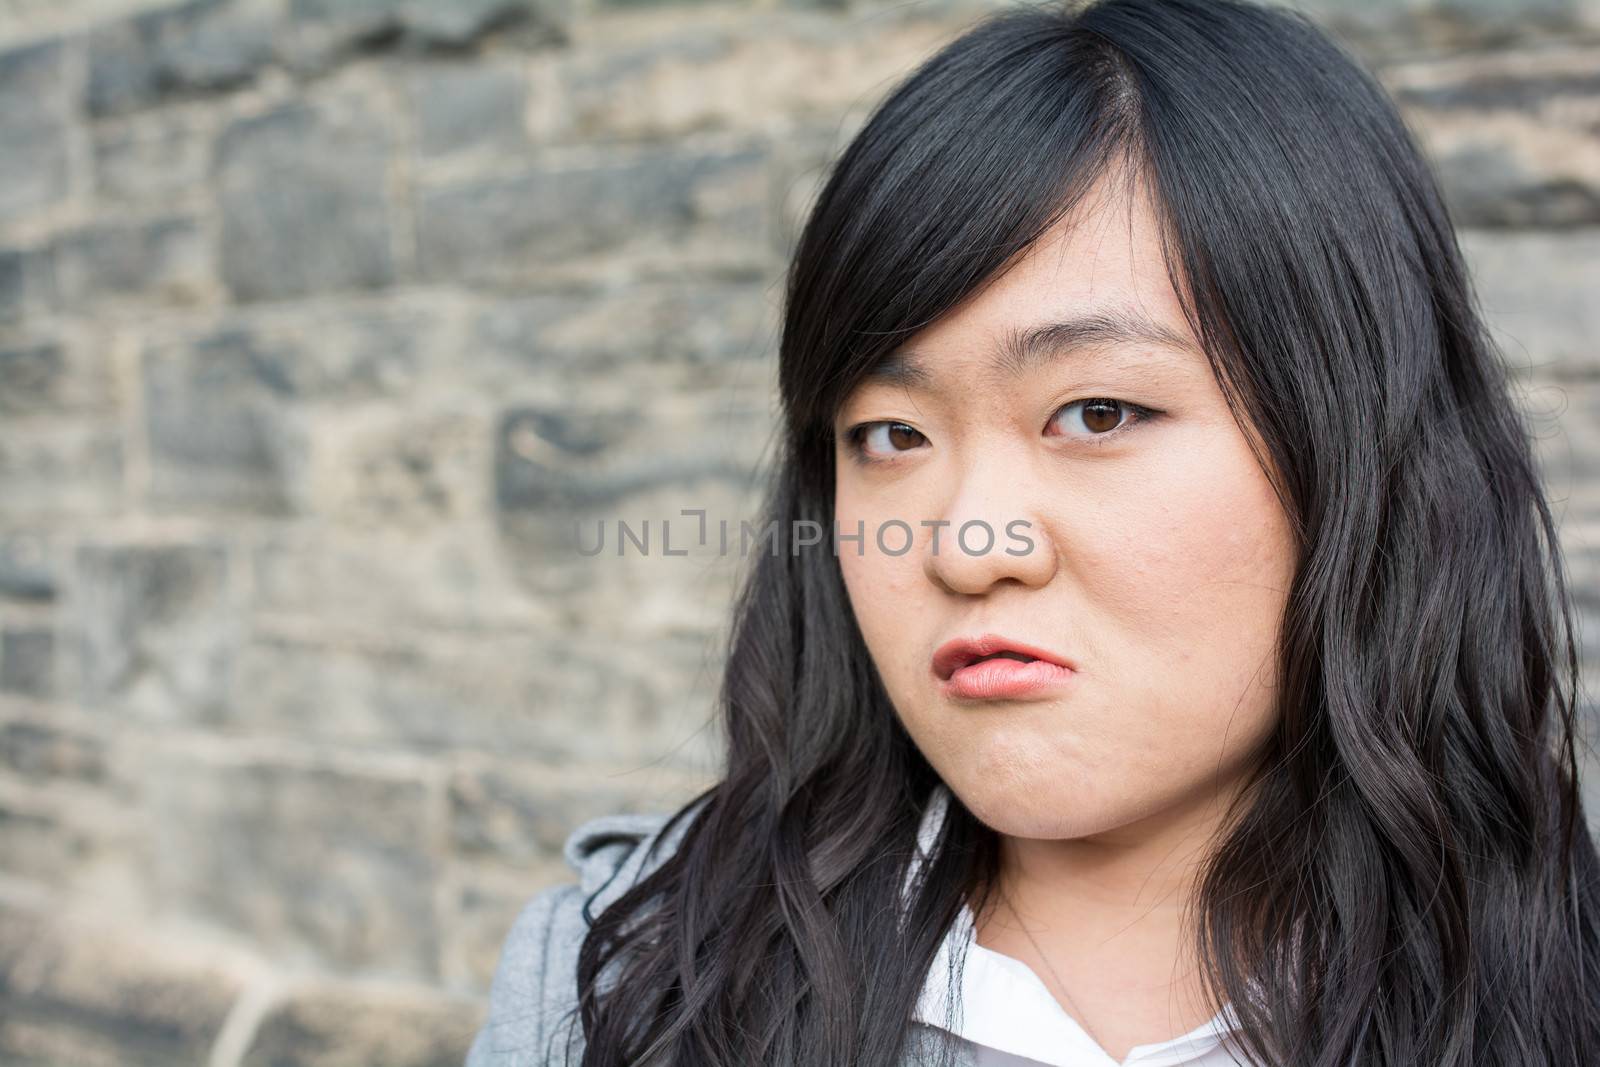 Portrait of young woman in front of a stone wall looking angry